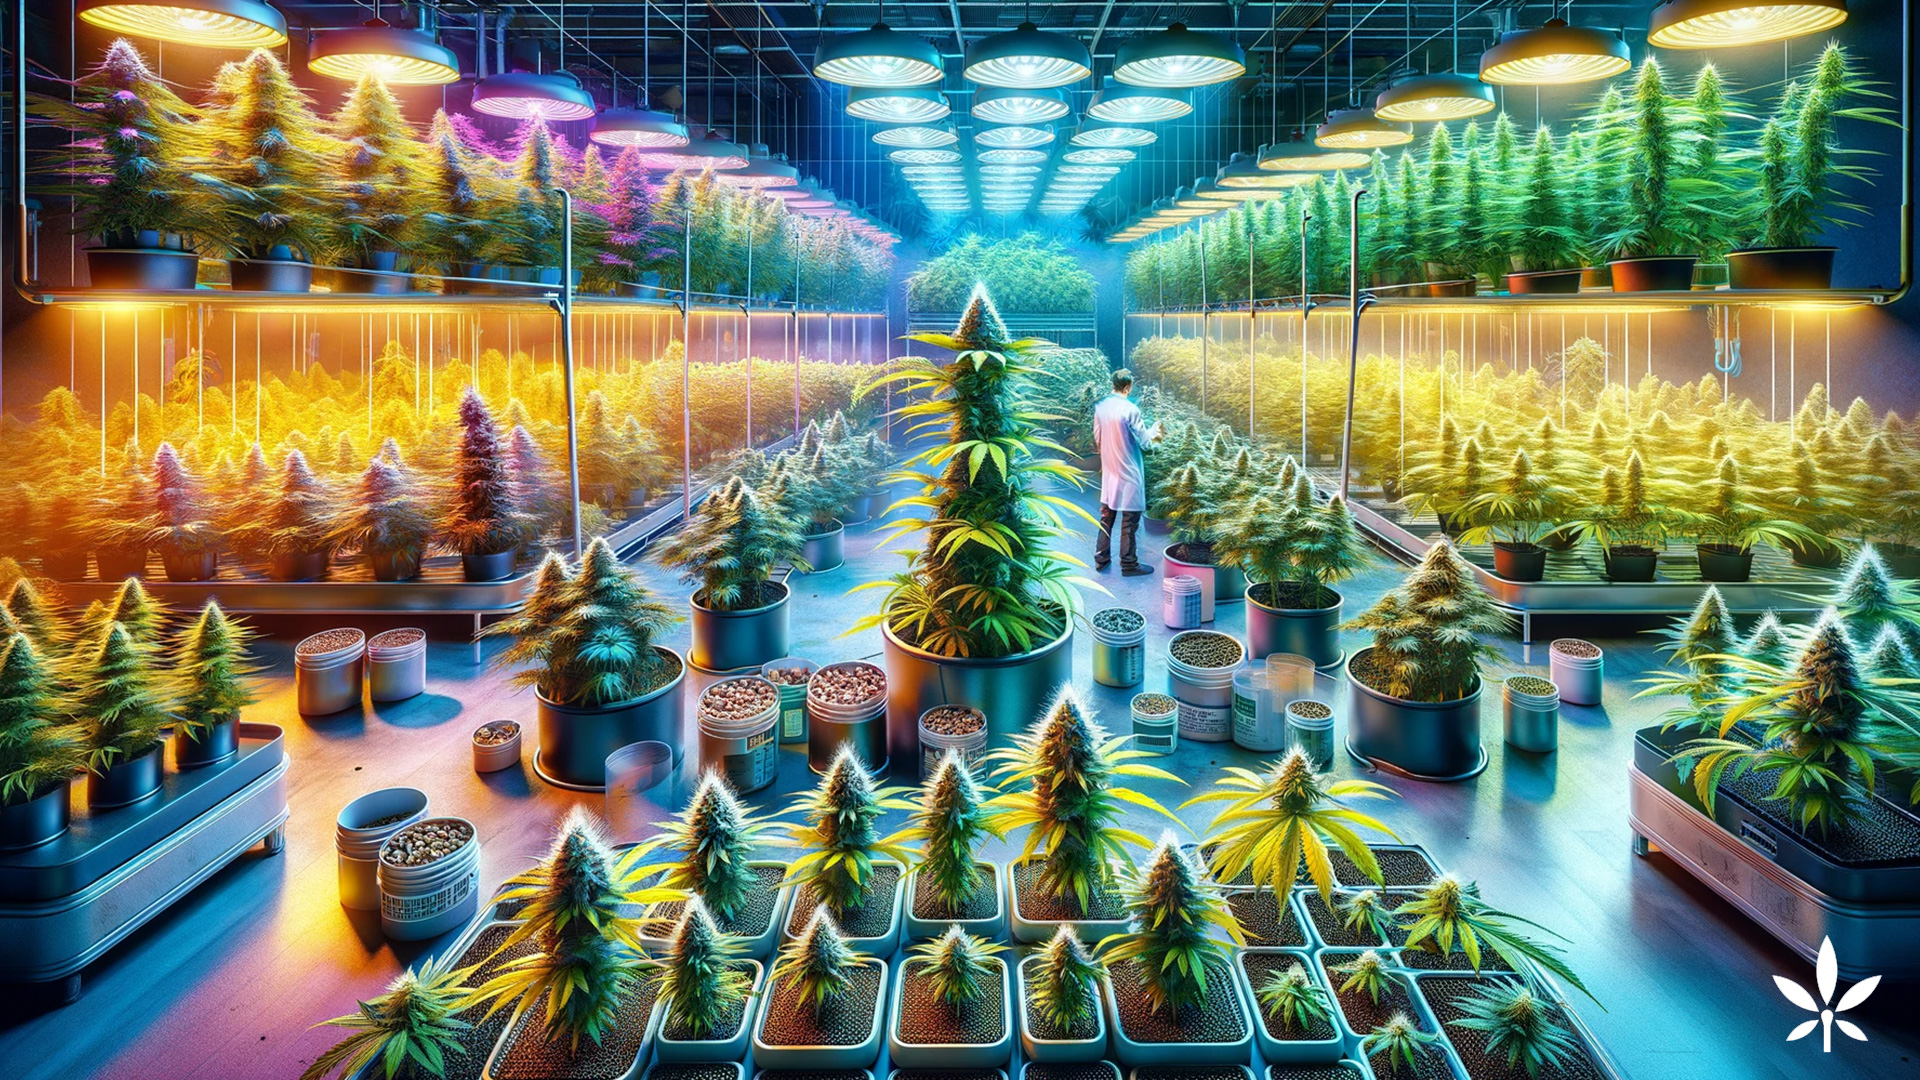 Modern greenhouse with various cannabis growth stages, showcasing cultivation expertise.